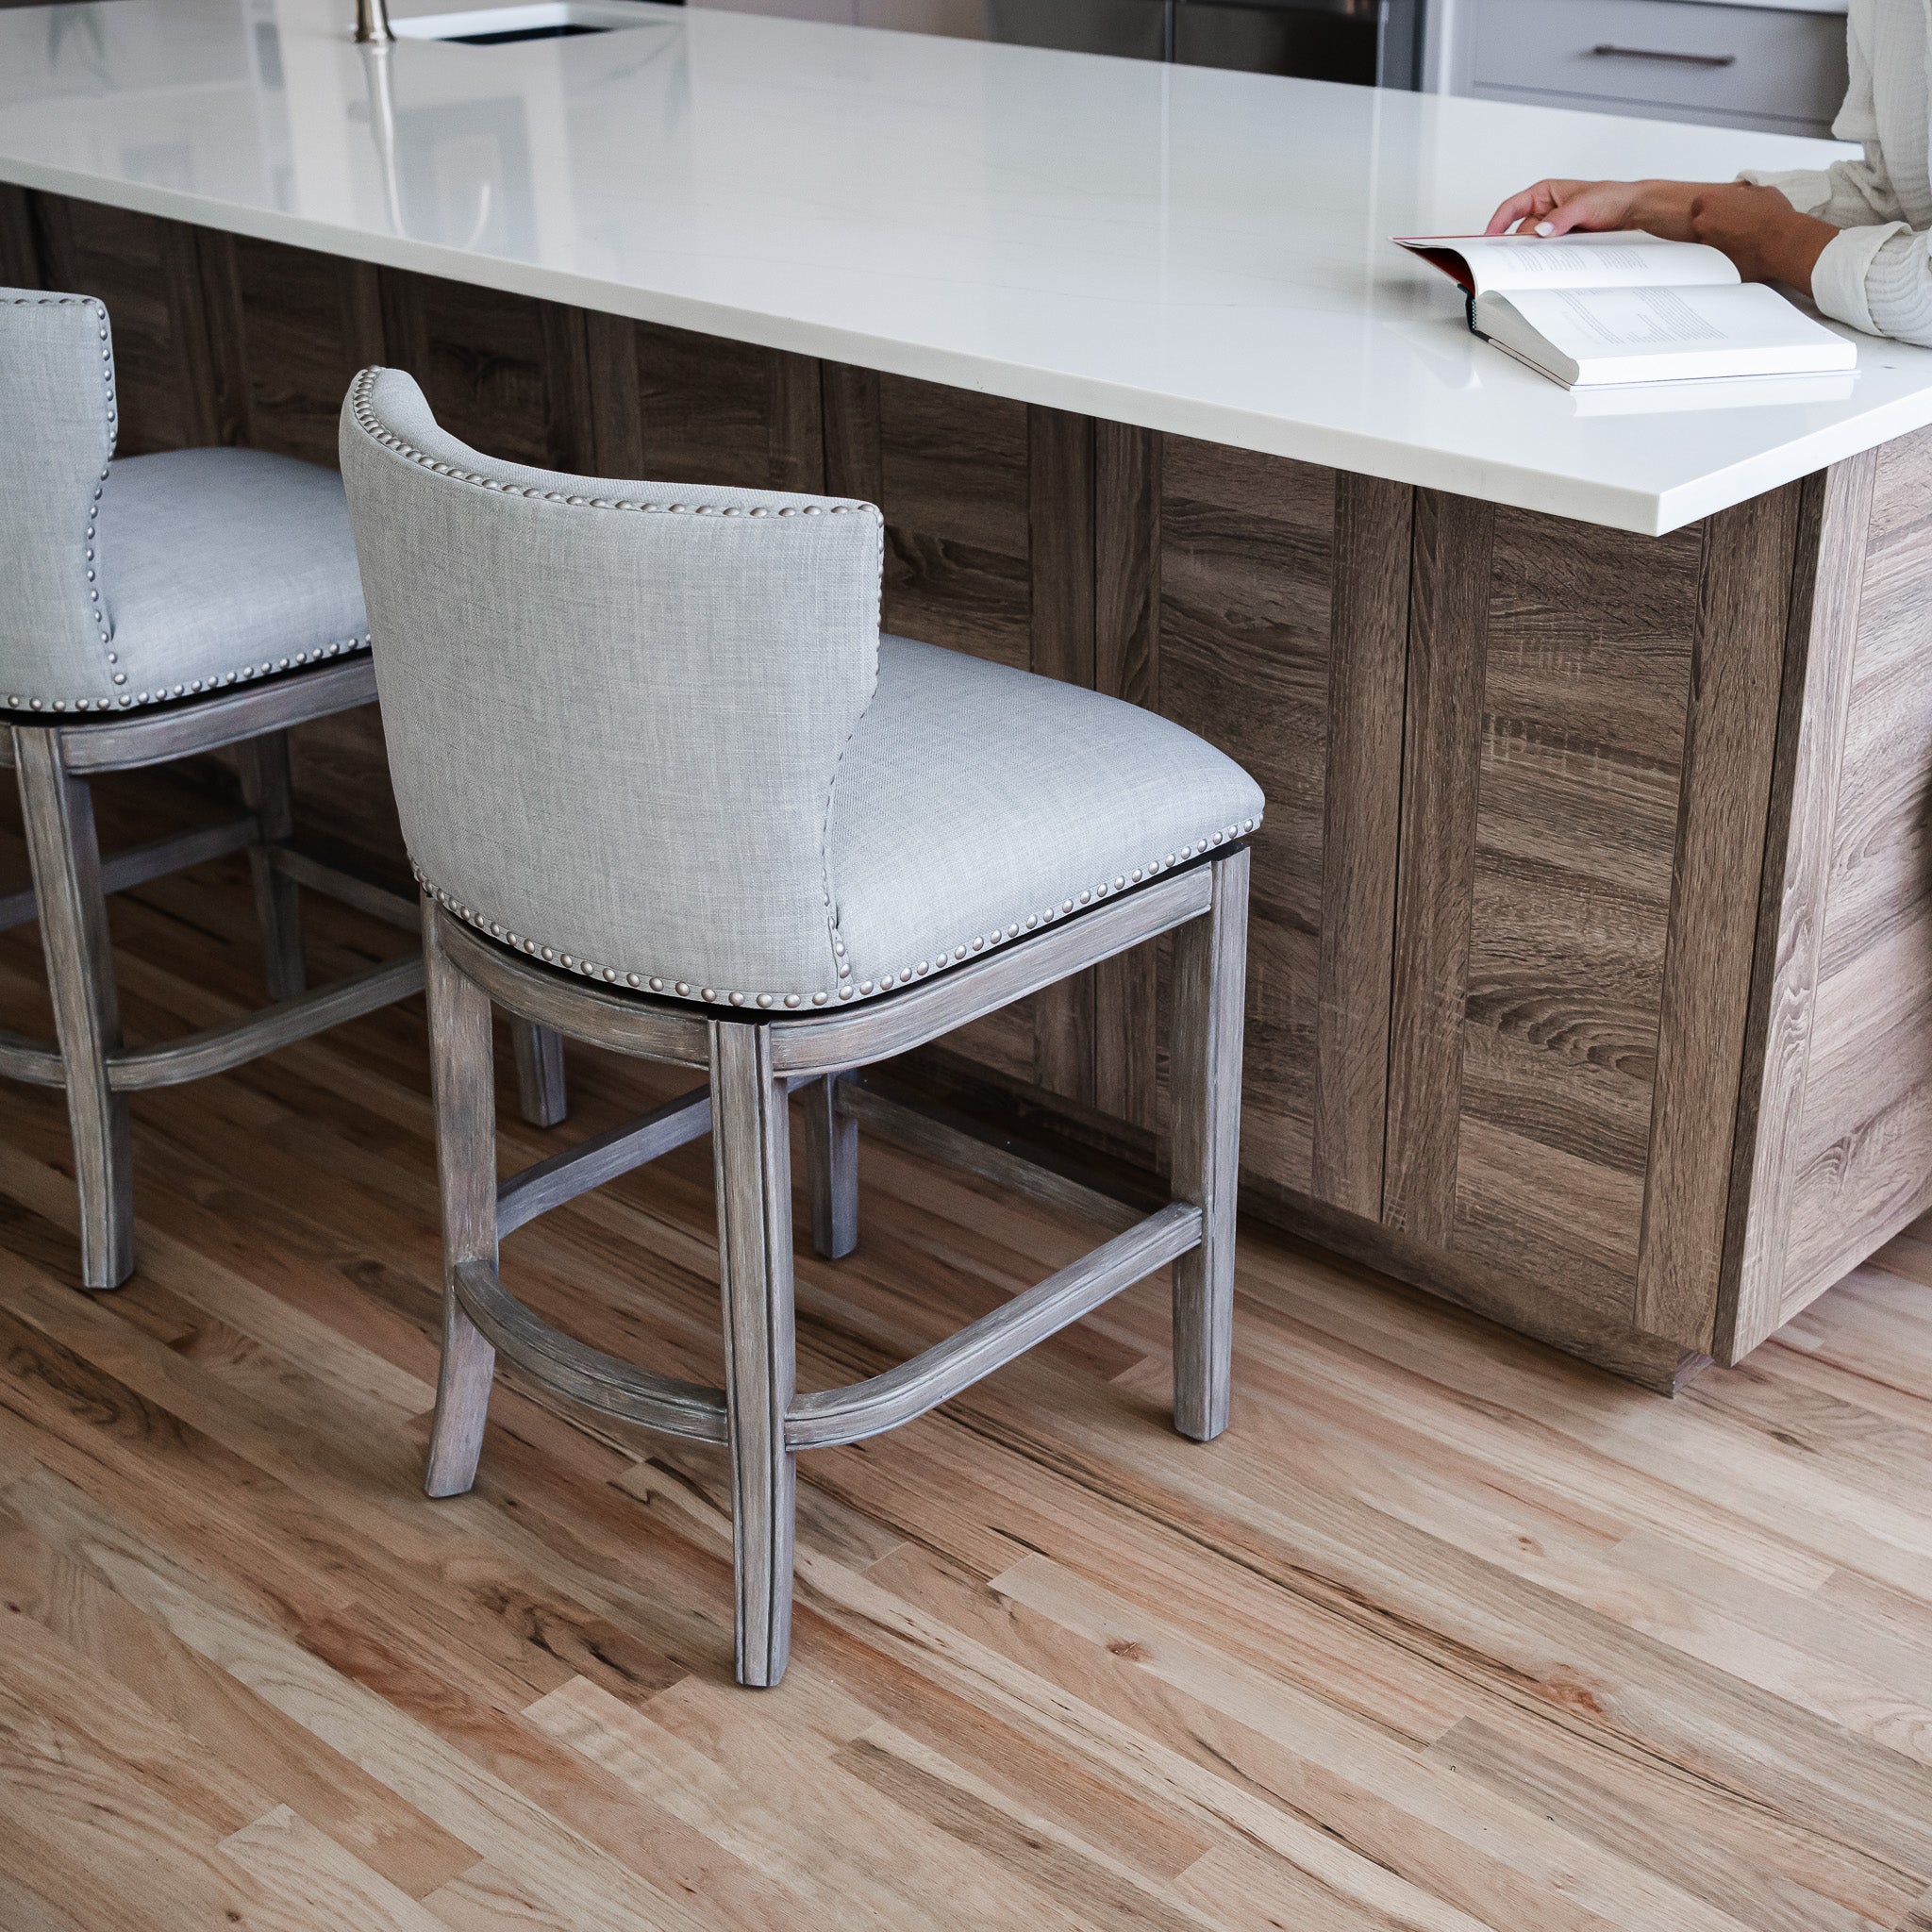 Hugo Counter Stool in Reclaimed Oak Finish with Ash Grey Fabric Upholstery in Stools by Maven Lane